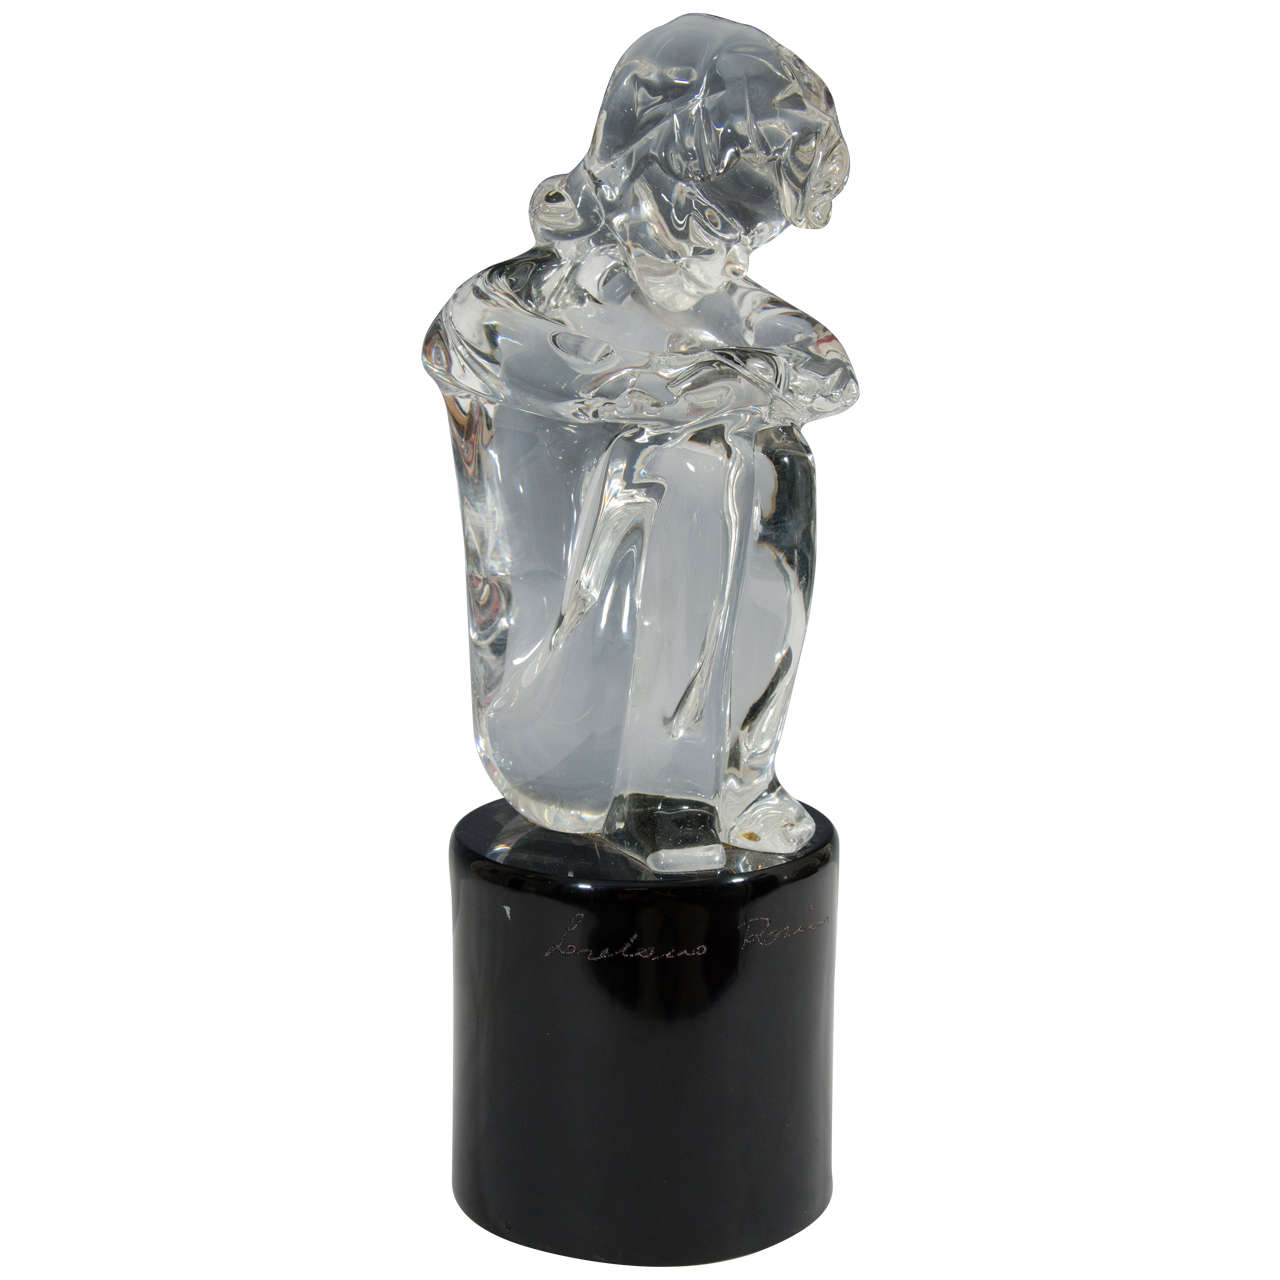 A Seated Glass Sculpture of a Girl by Loredano Rosin at 1stDibs